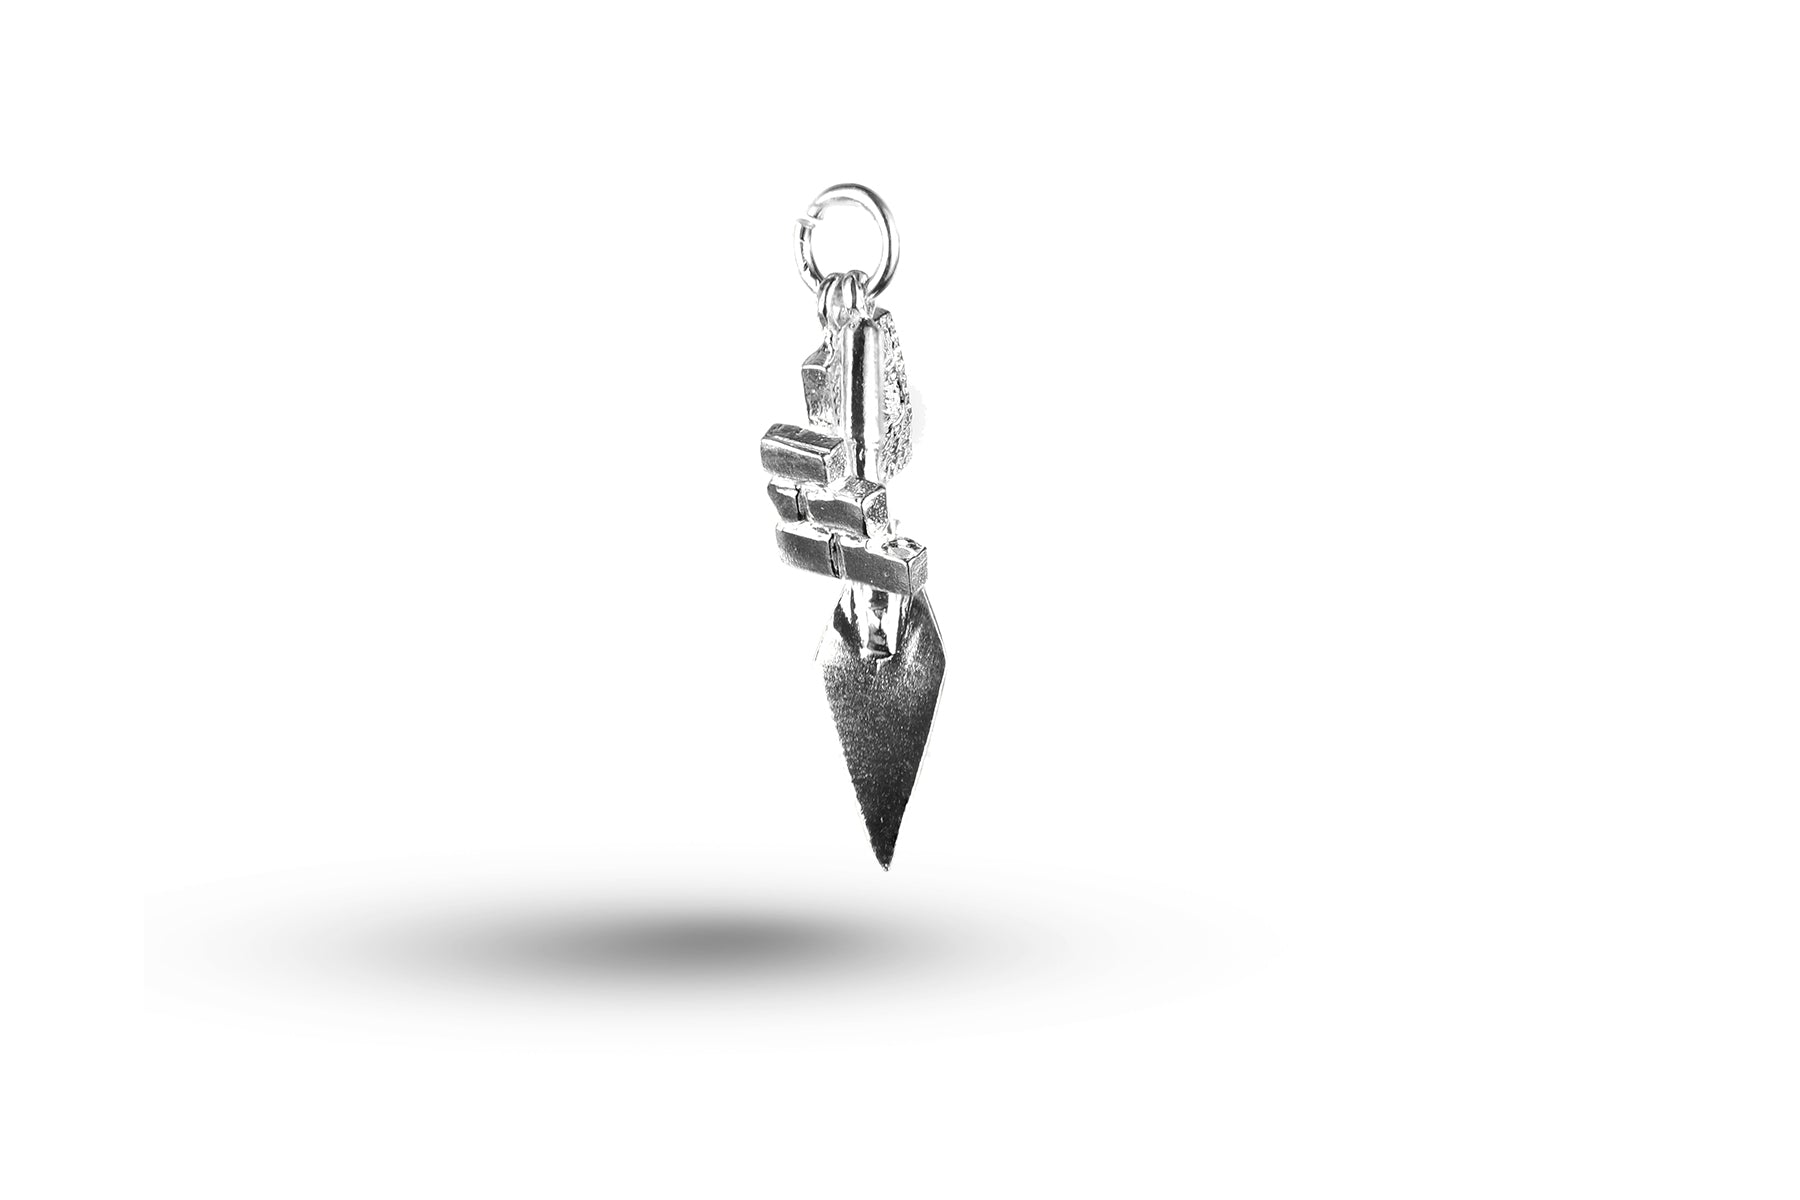 White gold Trowel and Corner Building charm.